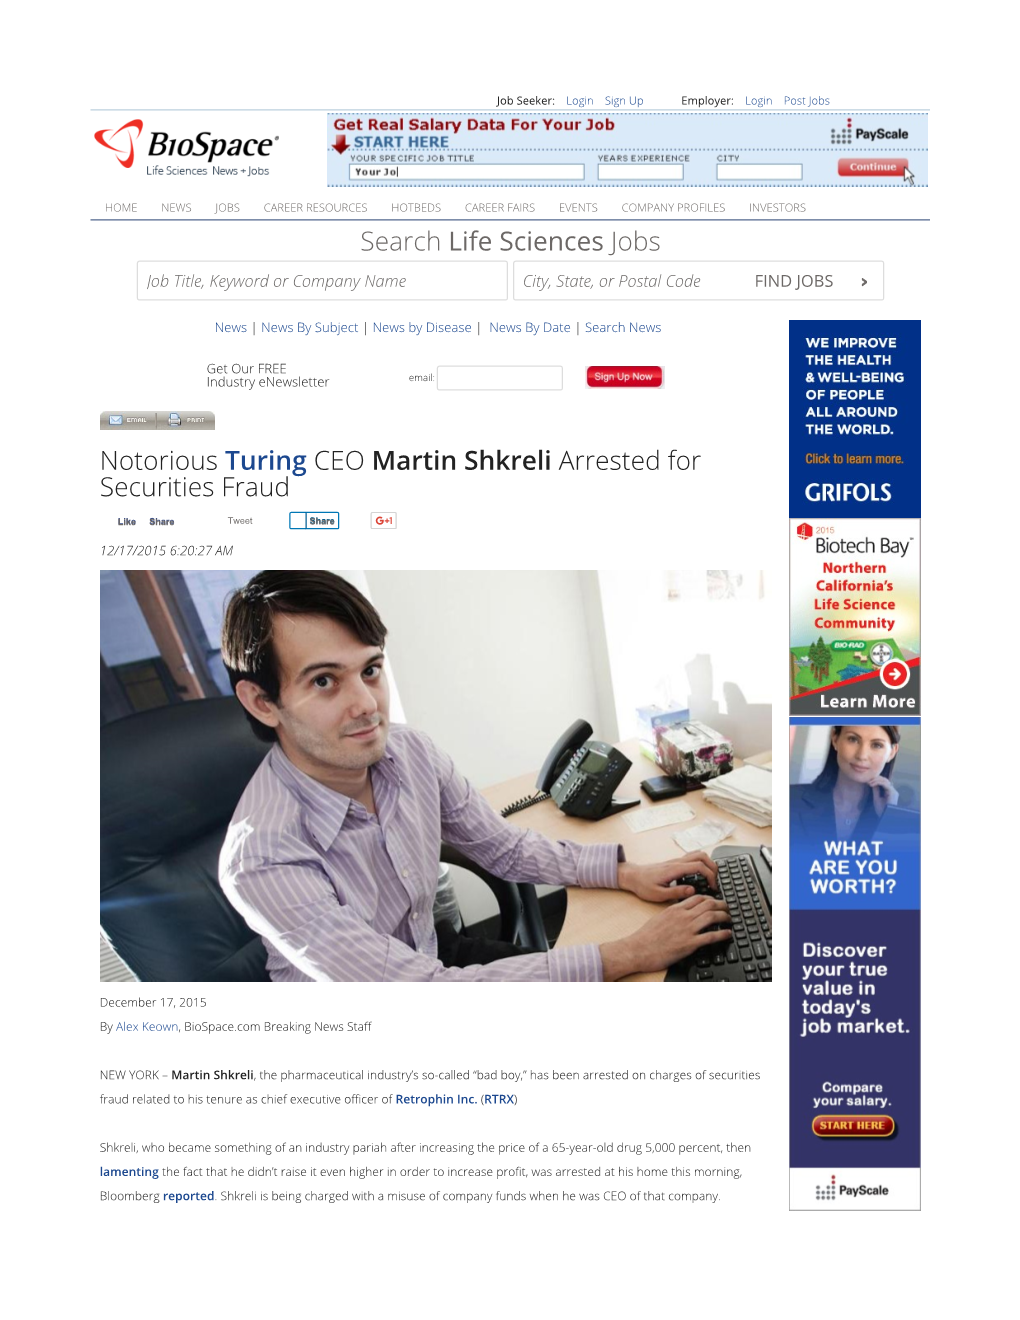 Notorious Turing CEO Martin Shkreli Arrested for Securities Fraud Like Share Tweet Share